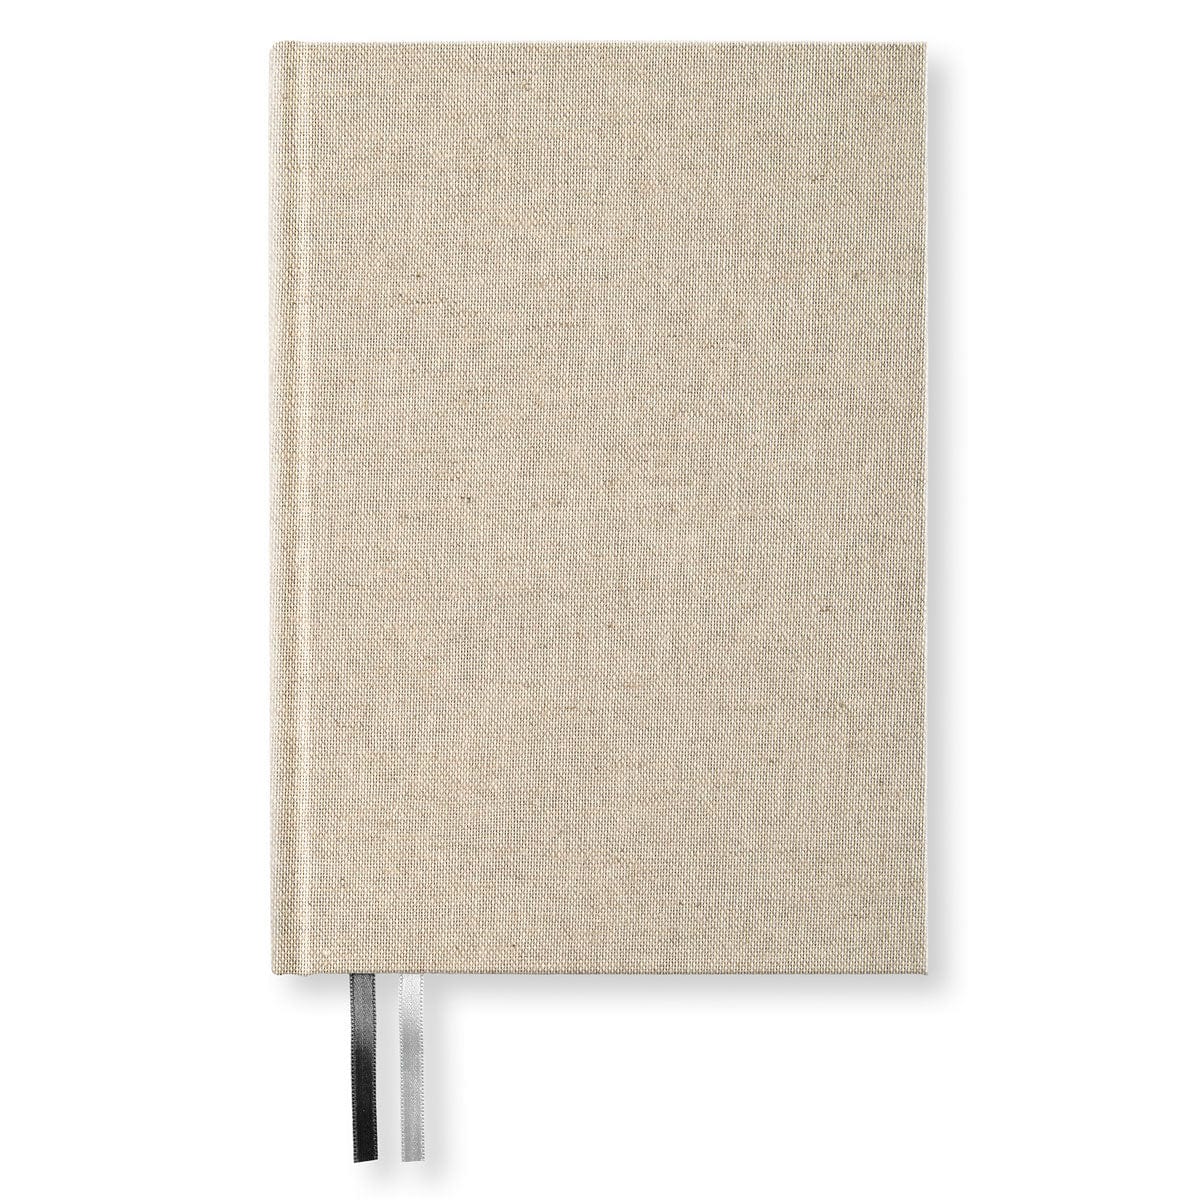 PaperStyle PS NOTEBOOK A5 176p. Dotted Rough Linen